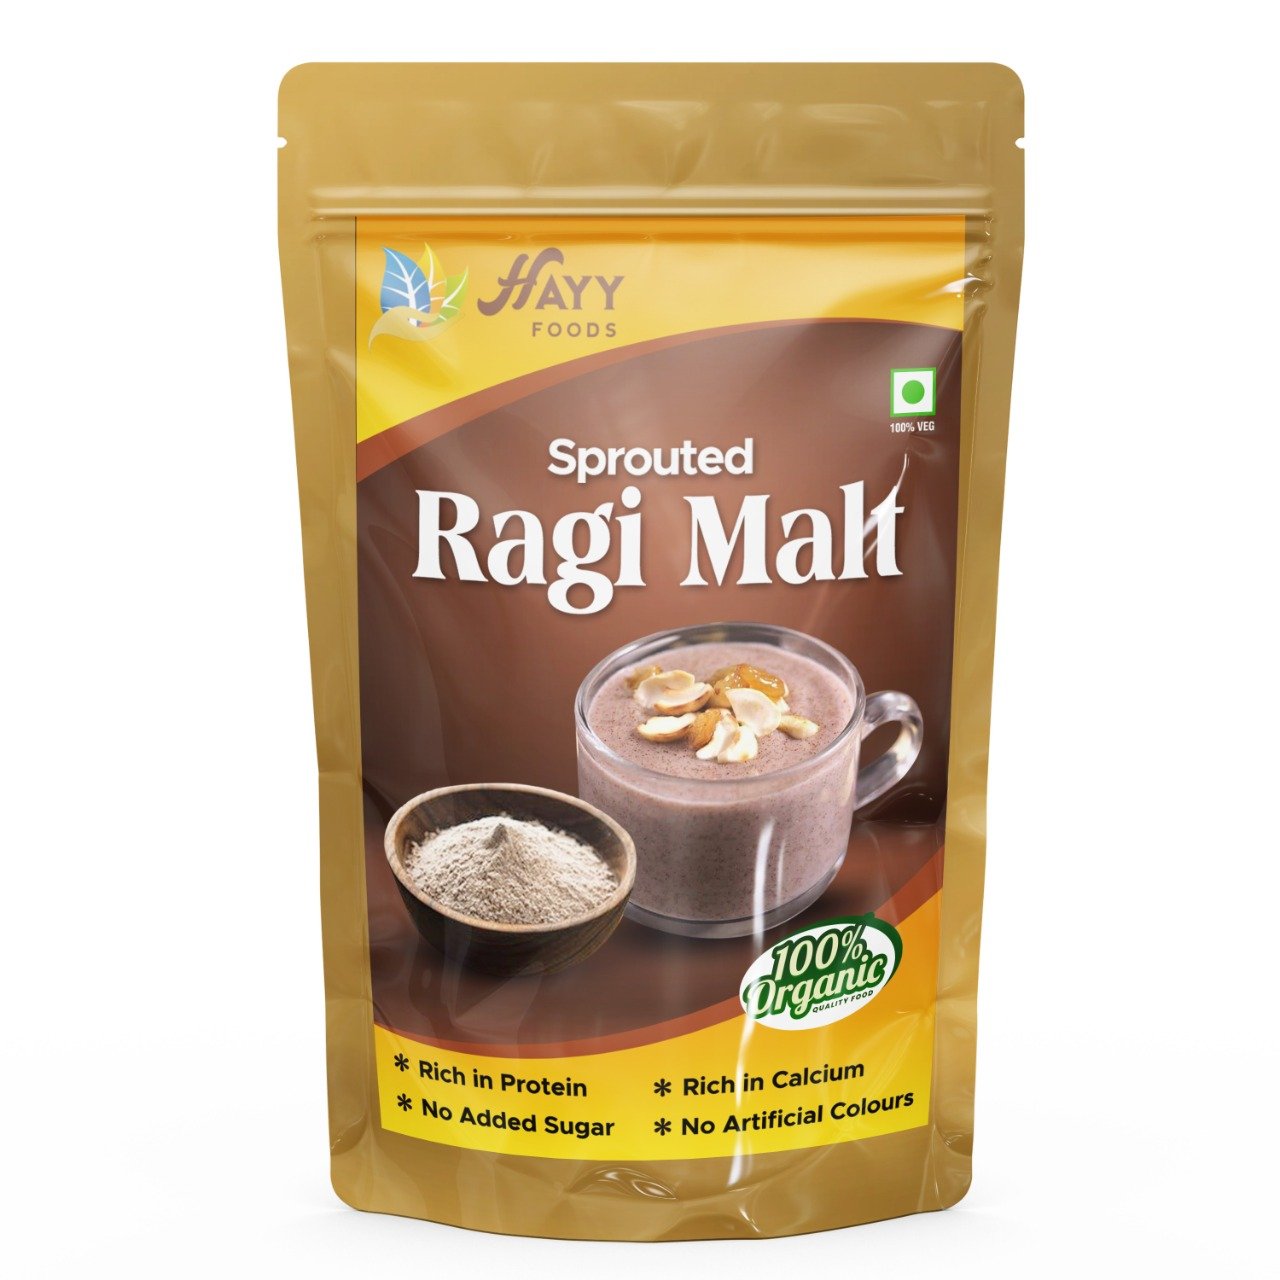 Ragi Flour - A Nutritious and Wholesome Food for All | FROZIT Blog